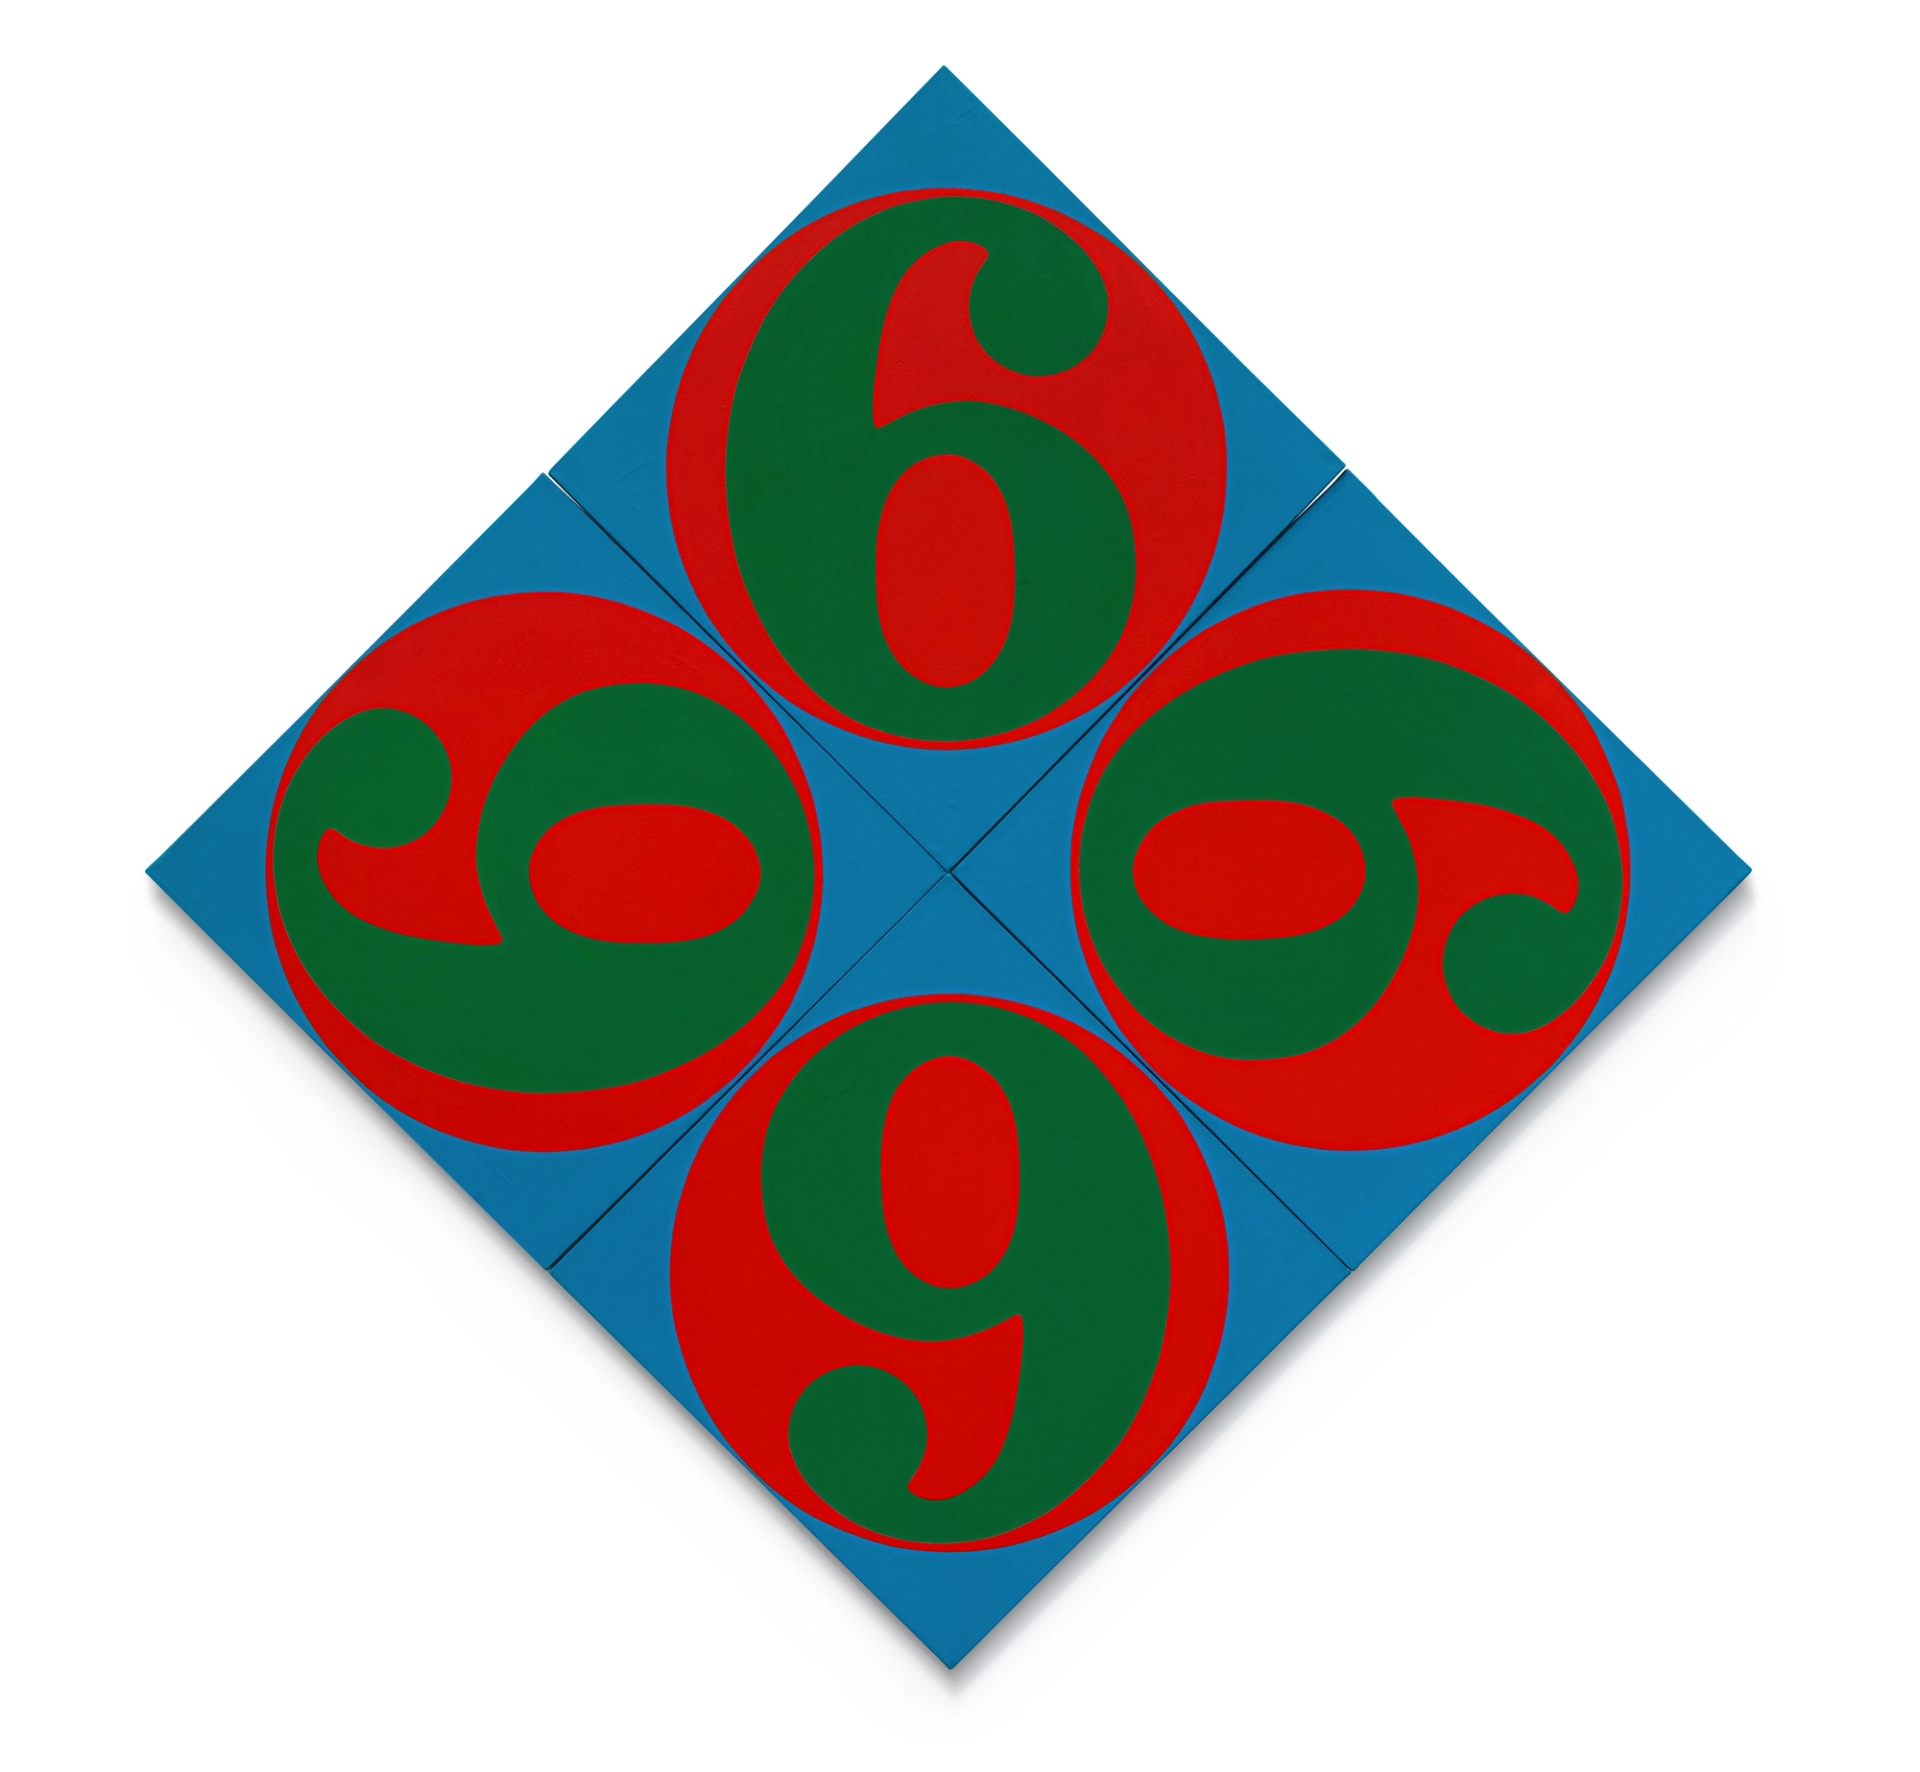 An image of a work by Robert Indiana. It consists of Four Sixes done in green within a red circle. The circles are shown rotating within the square composition, against a blue background.